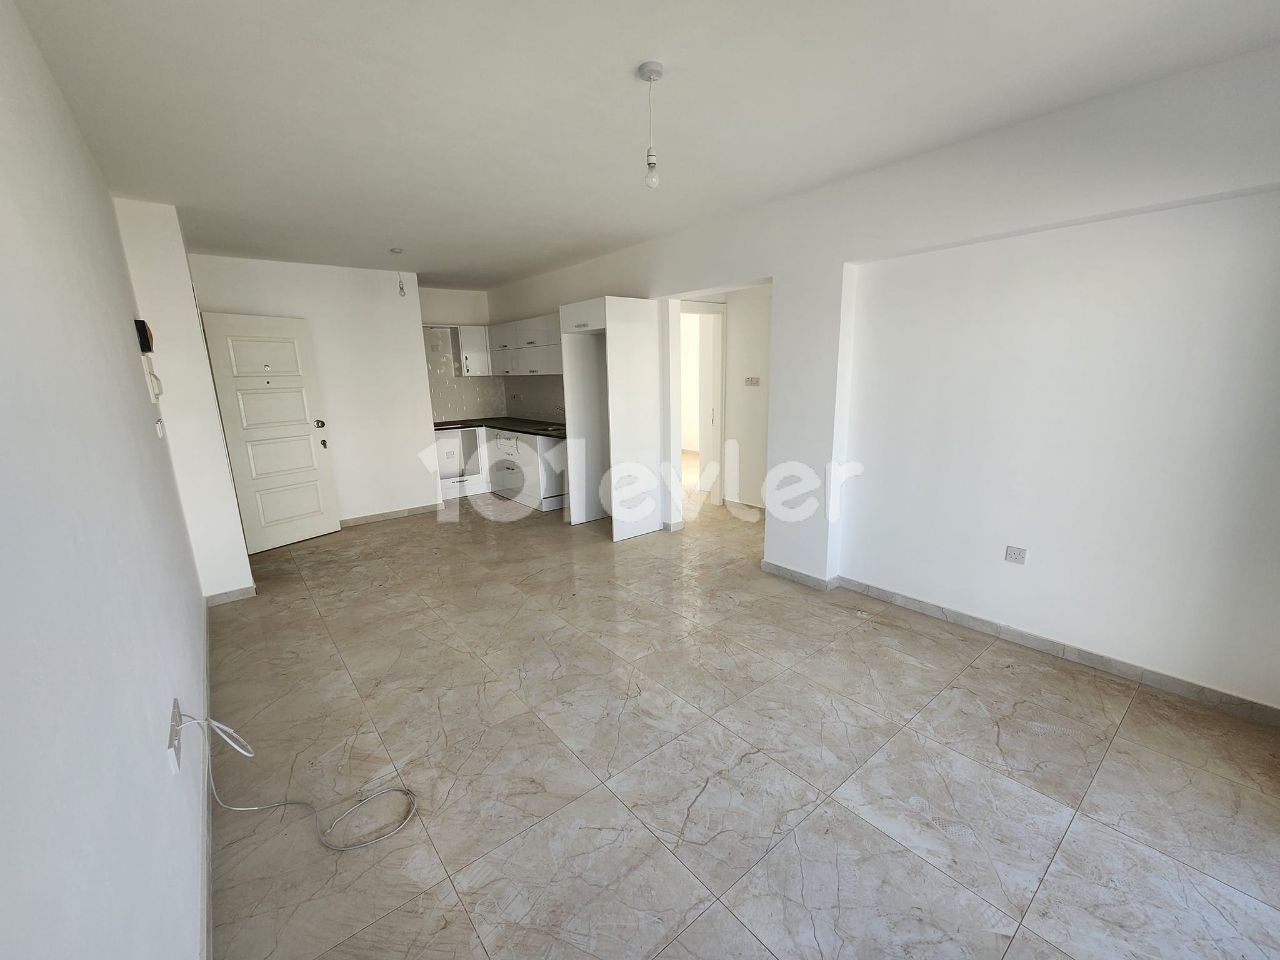 ÇANAKKALE 2+1 UNFURNISHED FLAT RENT IS 400 $ 6 RENT 1 DEPOSIT 1 COMMISSION DUE DUE 6 MONTHS PAYMENT IN ADVANCE. 75 SQUARE METERS FRONT FACADE LAST 1 PIECE 2ND FLOOR